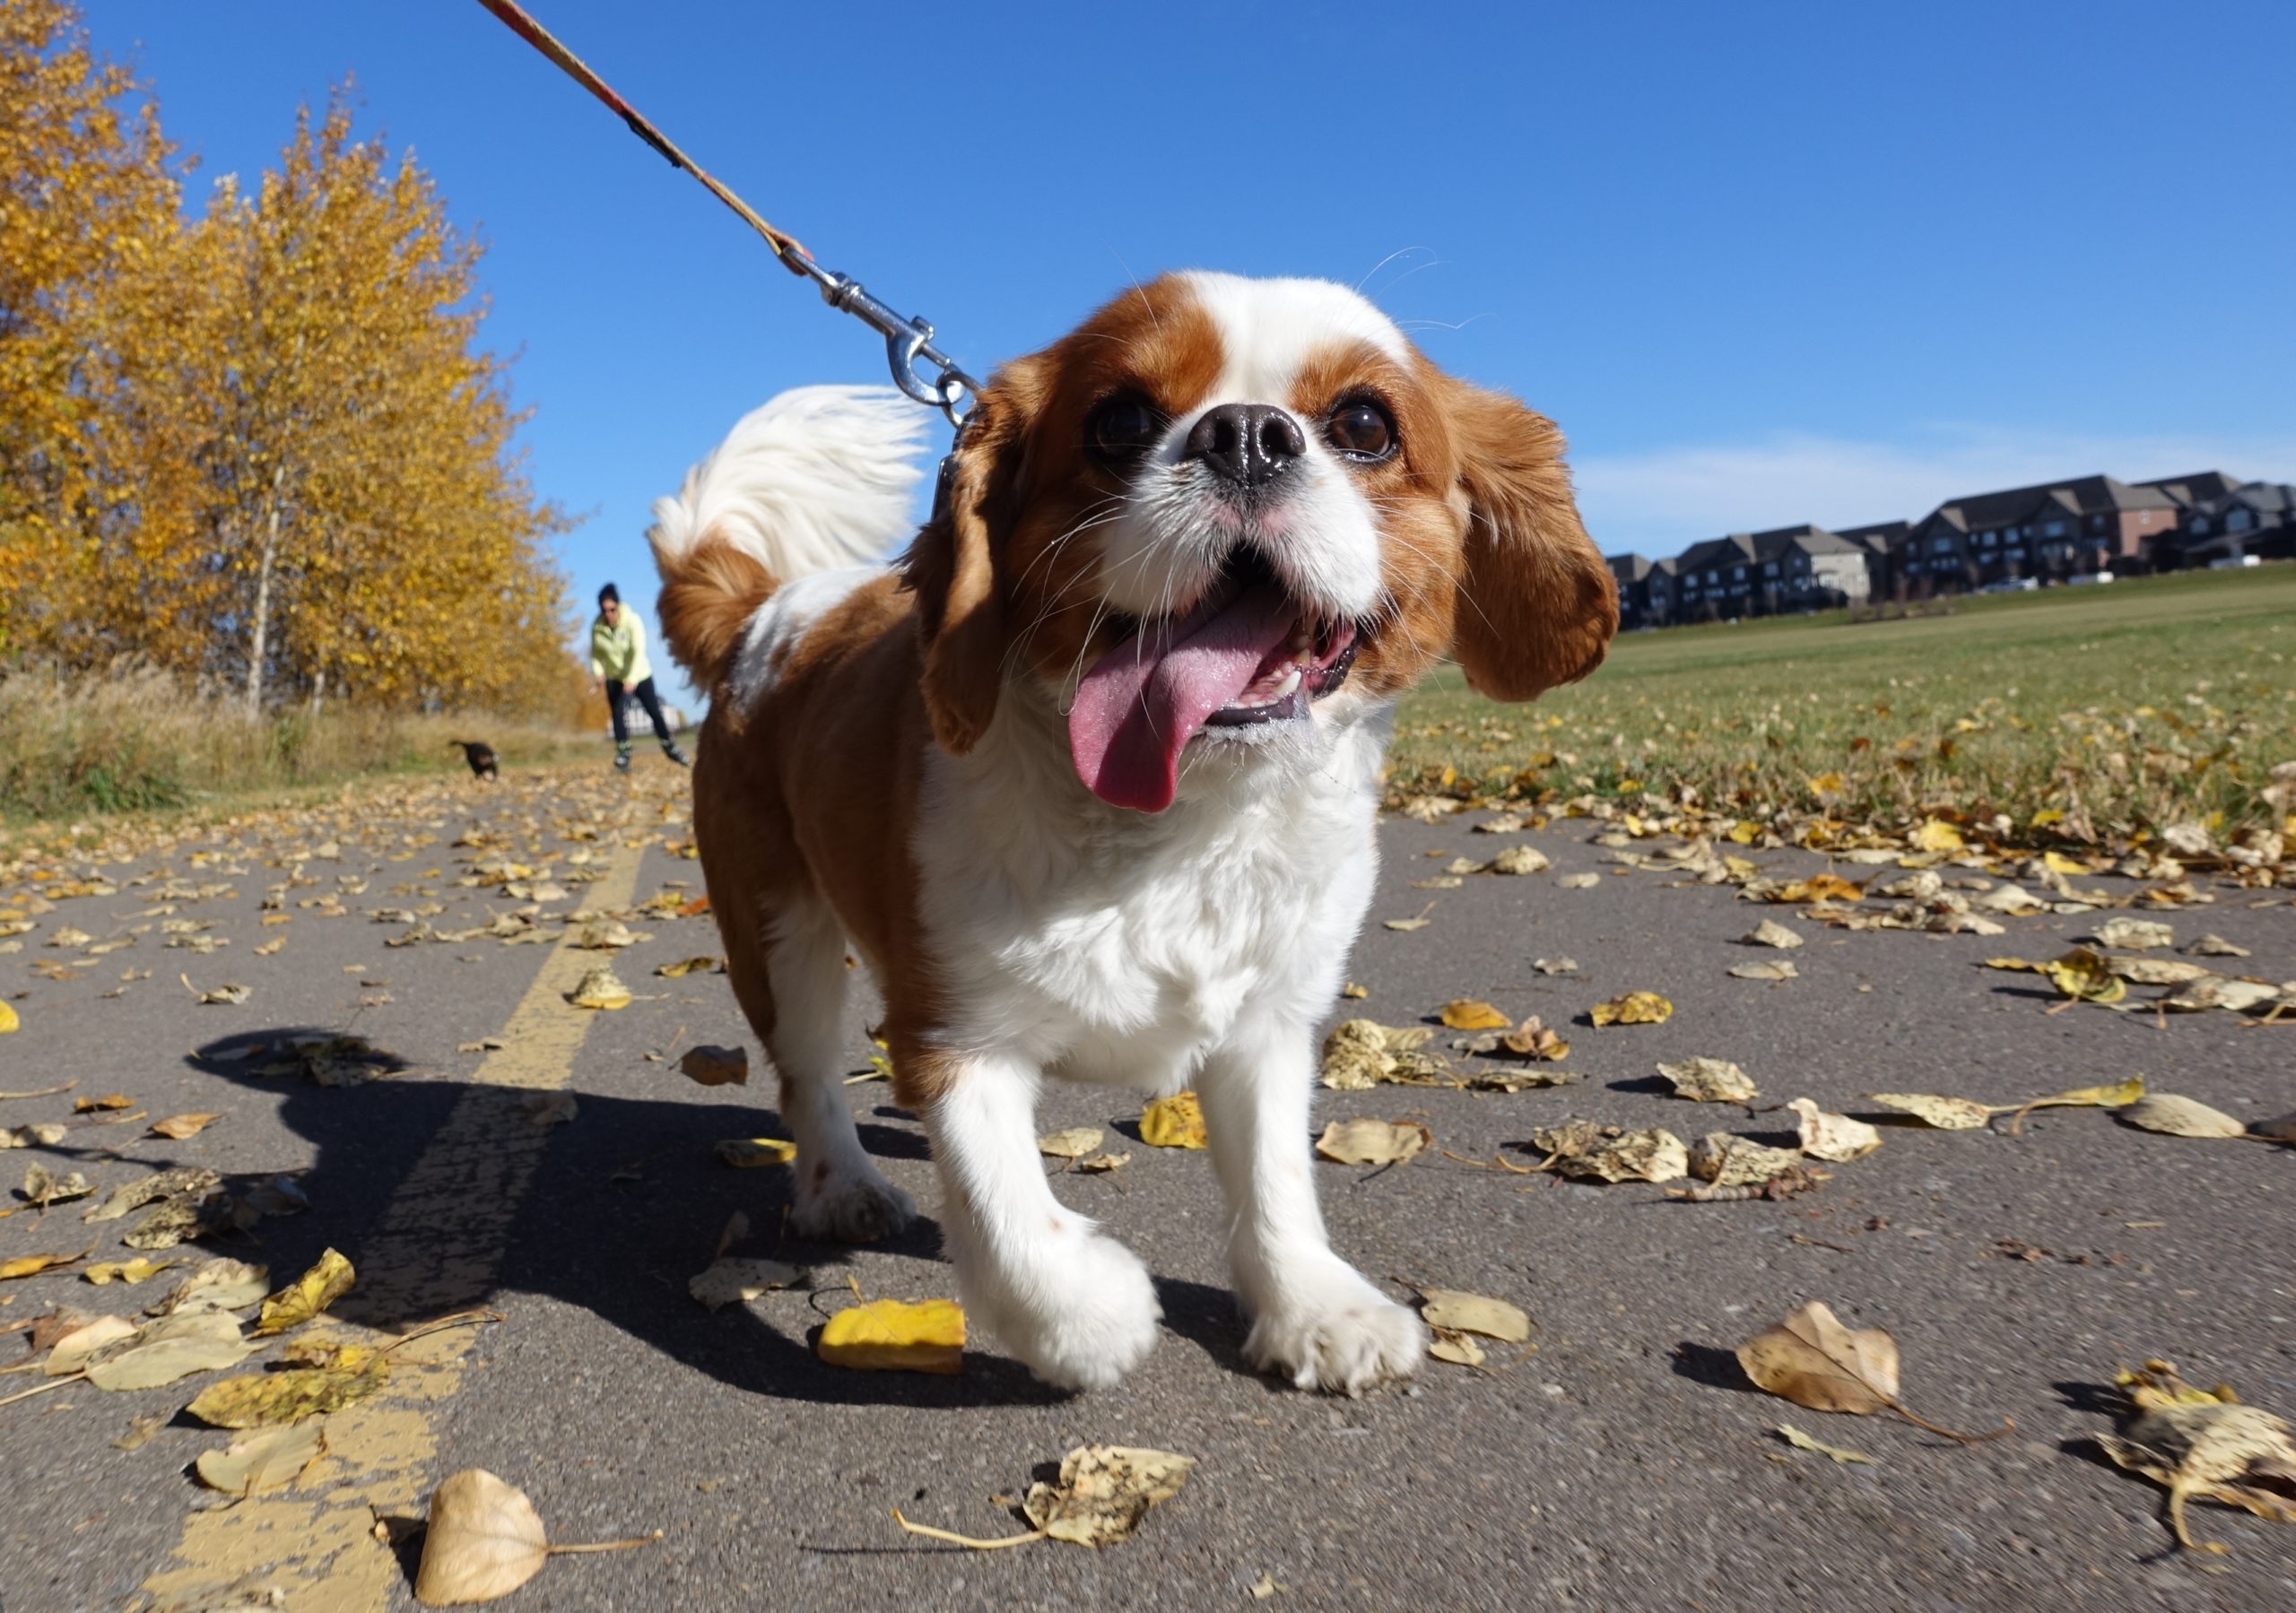 Puppy with tongue out on a walk in a park